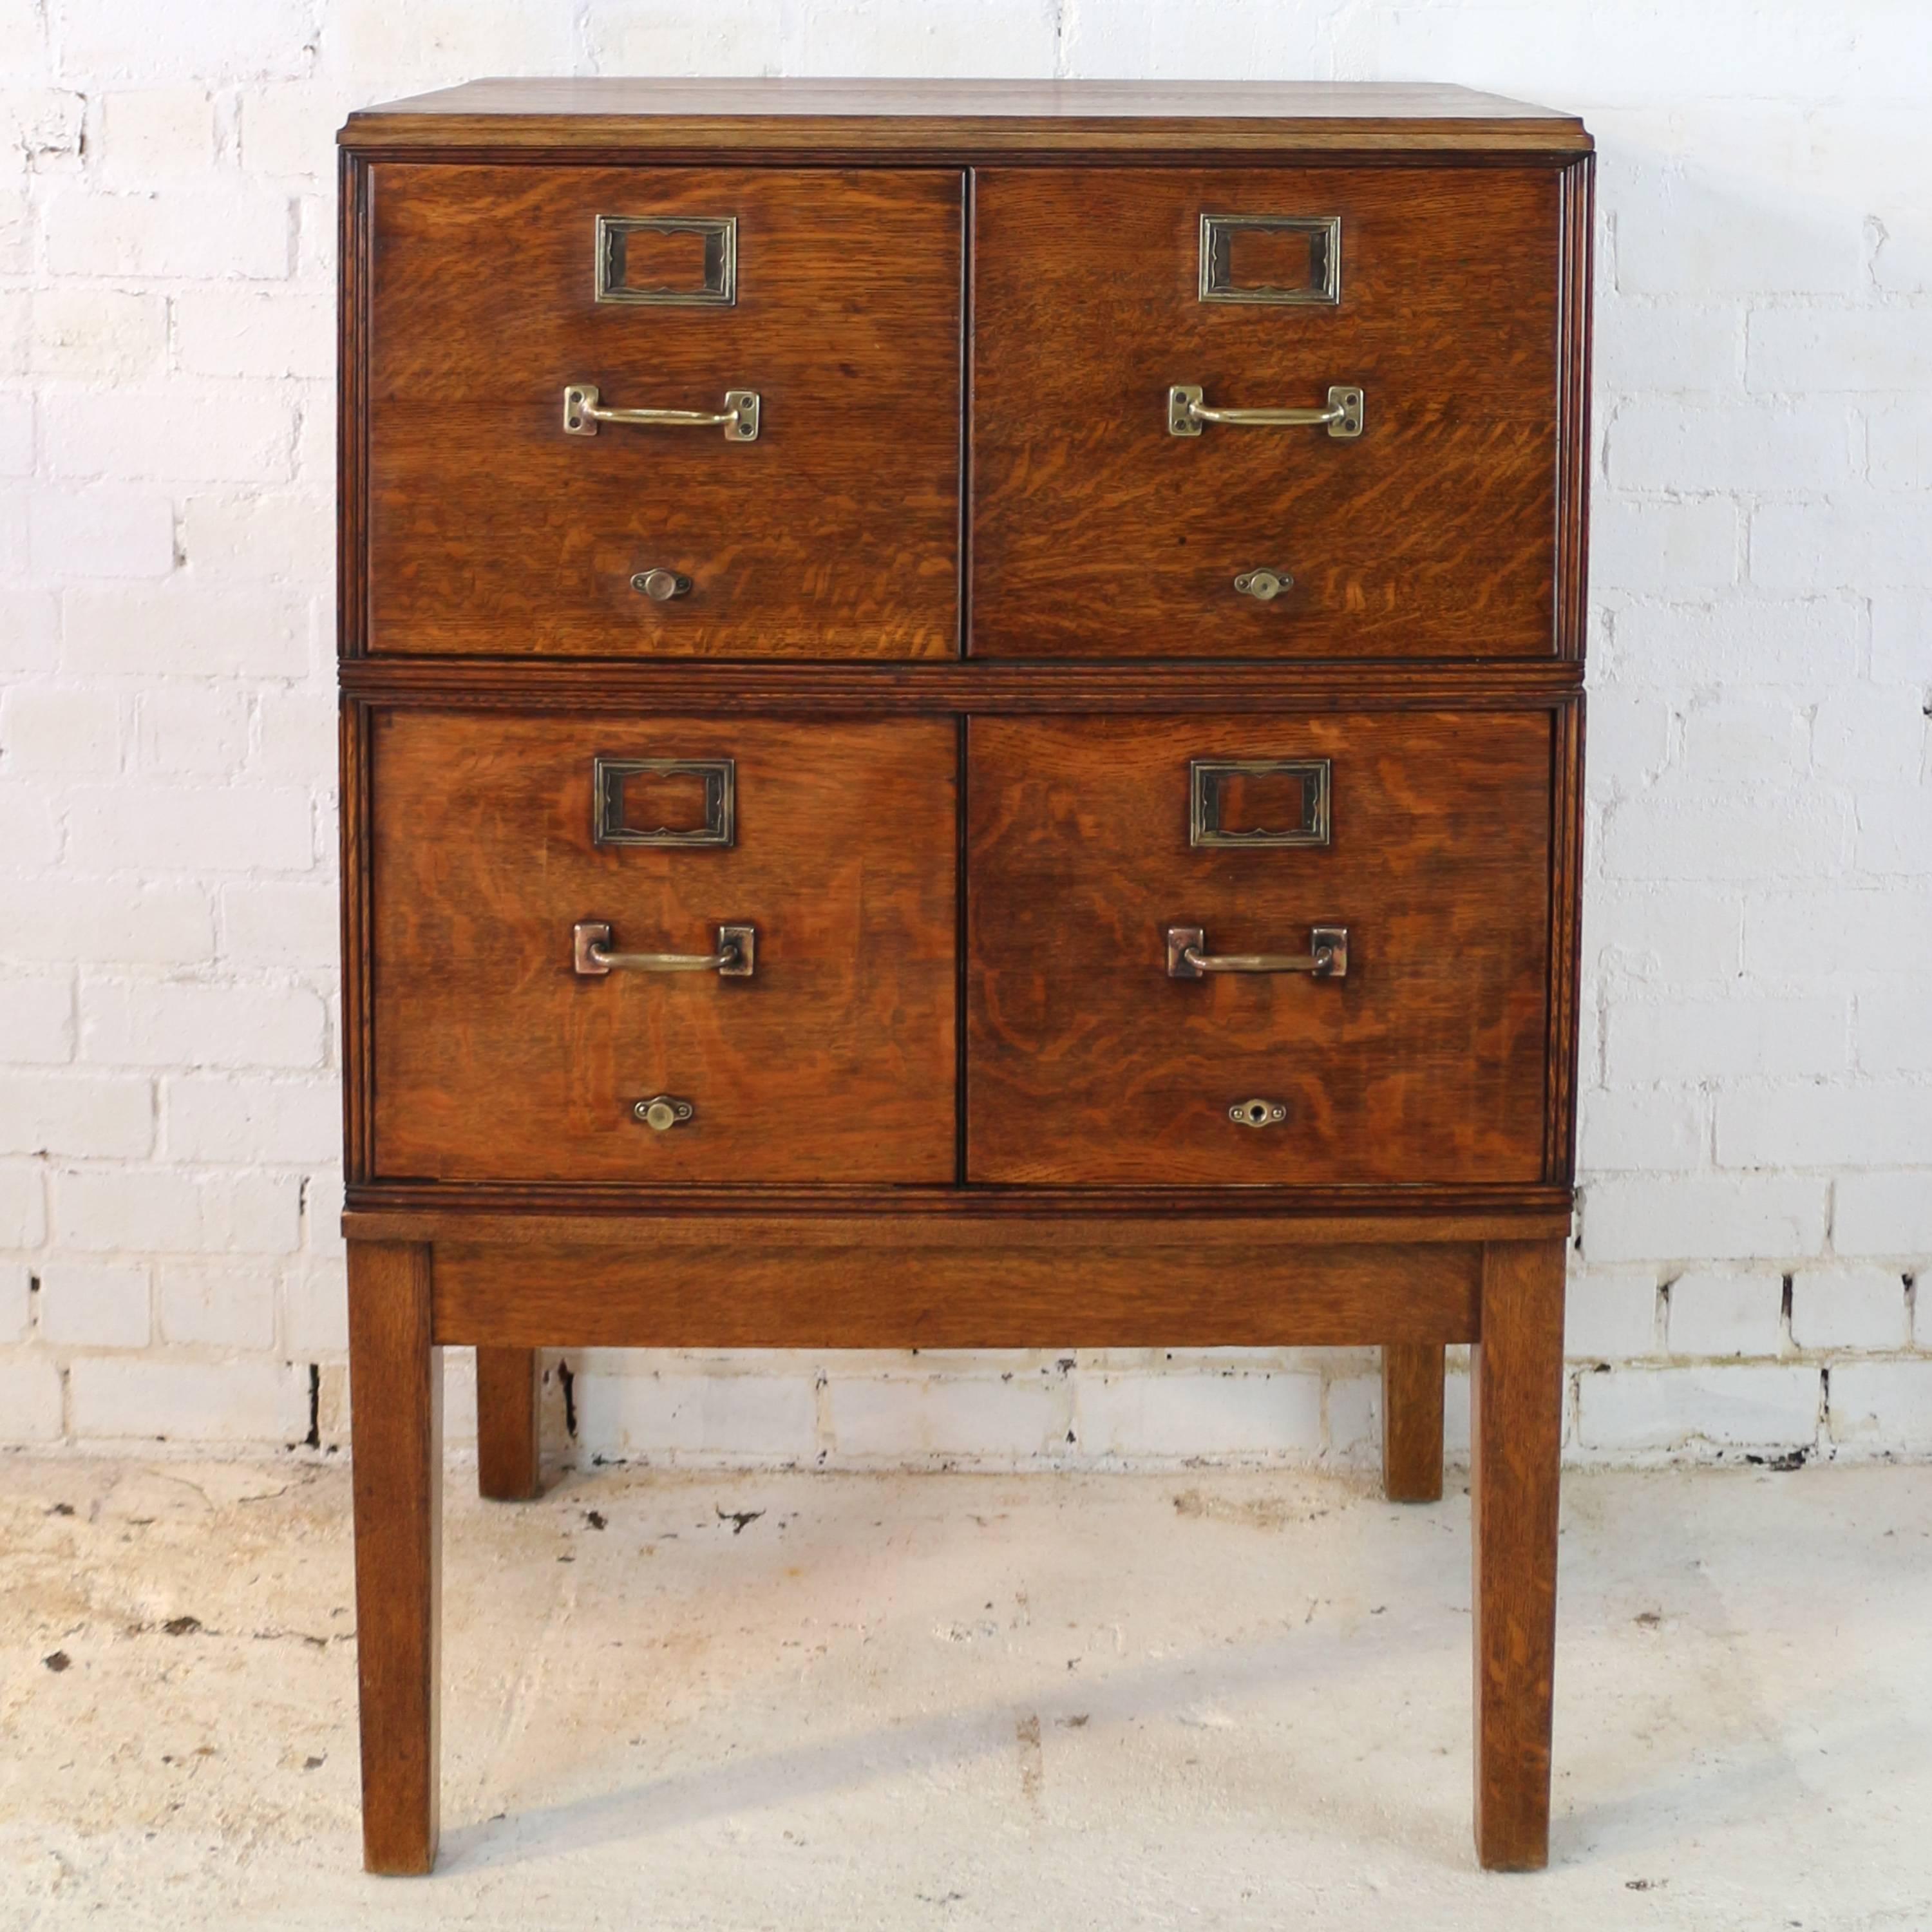 A rare double width antique quarter-sawn oak filing cabinet dating to circa 1910. Made by Yawman and Erbe, a leading maker of early filing systems, it has four large drawers with original brass handles, name plates, rods for guides/indexes and